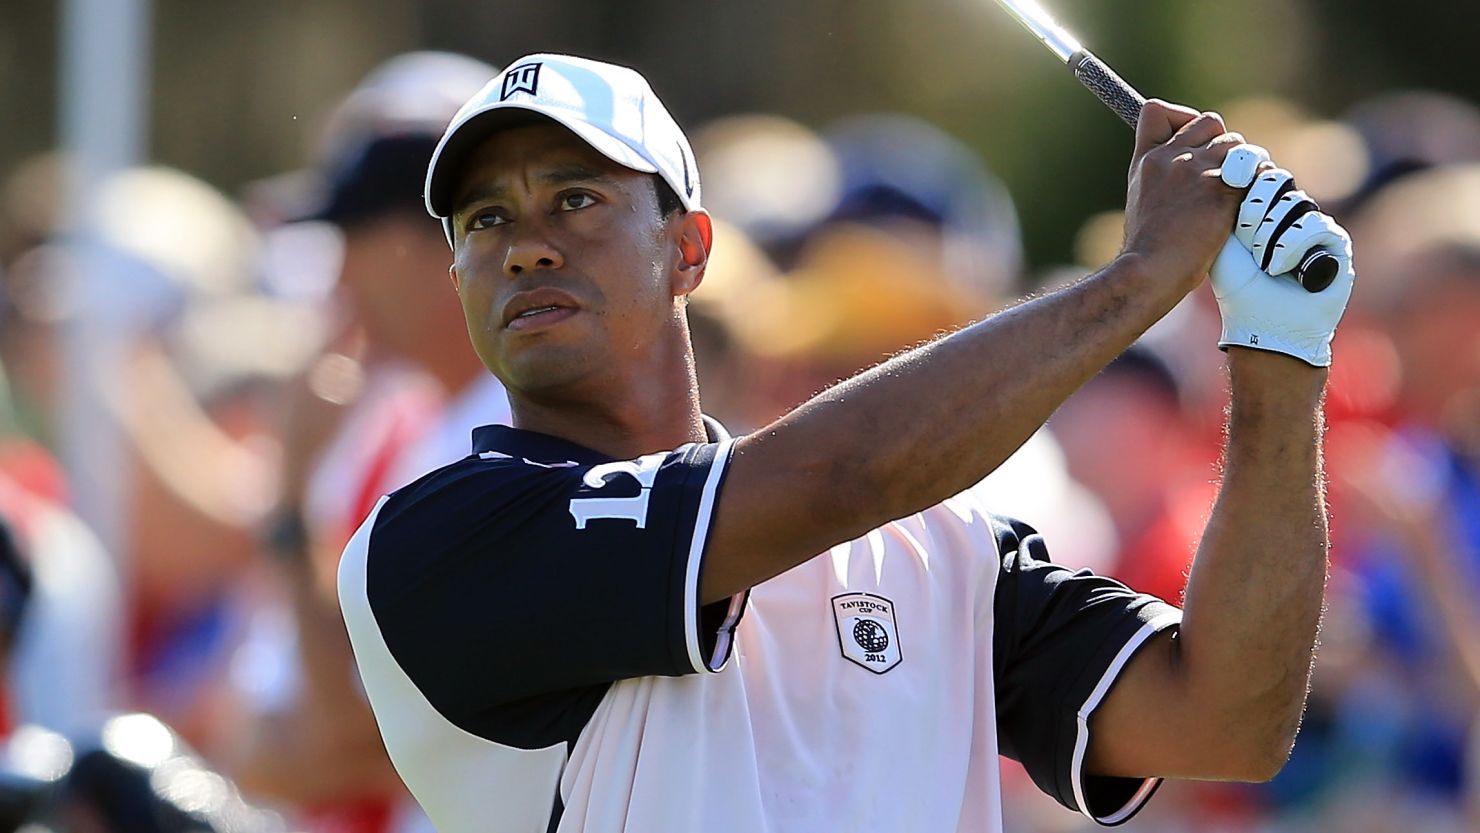 Tiger Woods was back in action at the Tavistock Cup just a week after suffering an Achilles injury